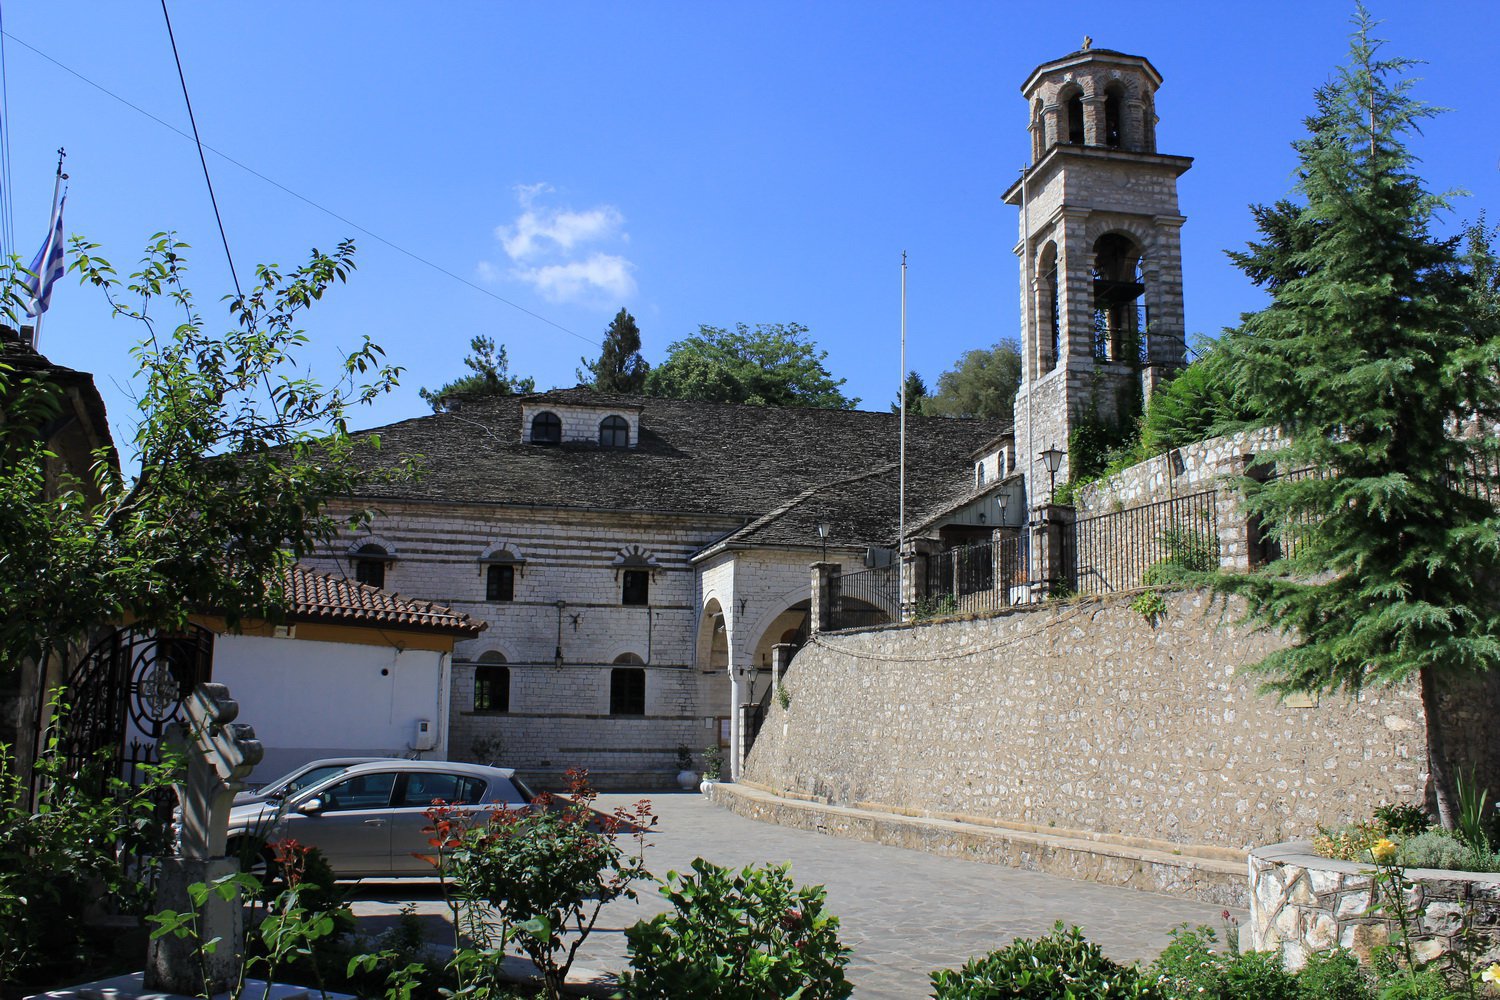 The Cathedral of Saint Athanasios